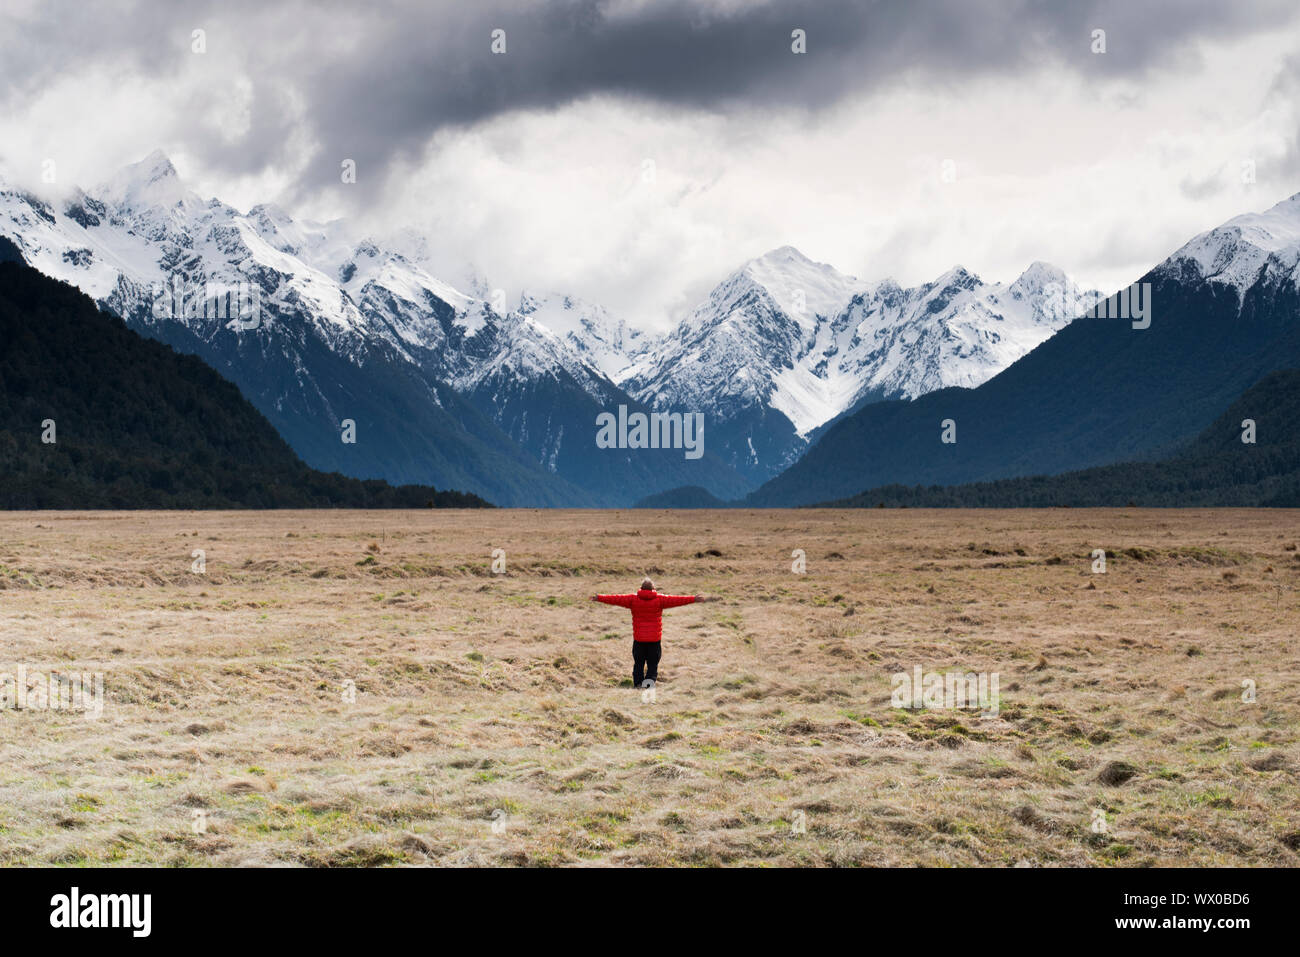 Man in red coat stood holding out his arms looking at snow capped mountains, Fiordland National Park, UNESCO, South Island, New Zealand, Pacific Stock Photo